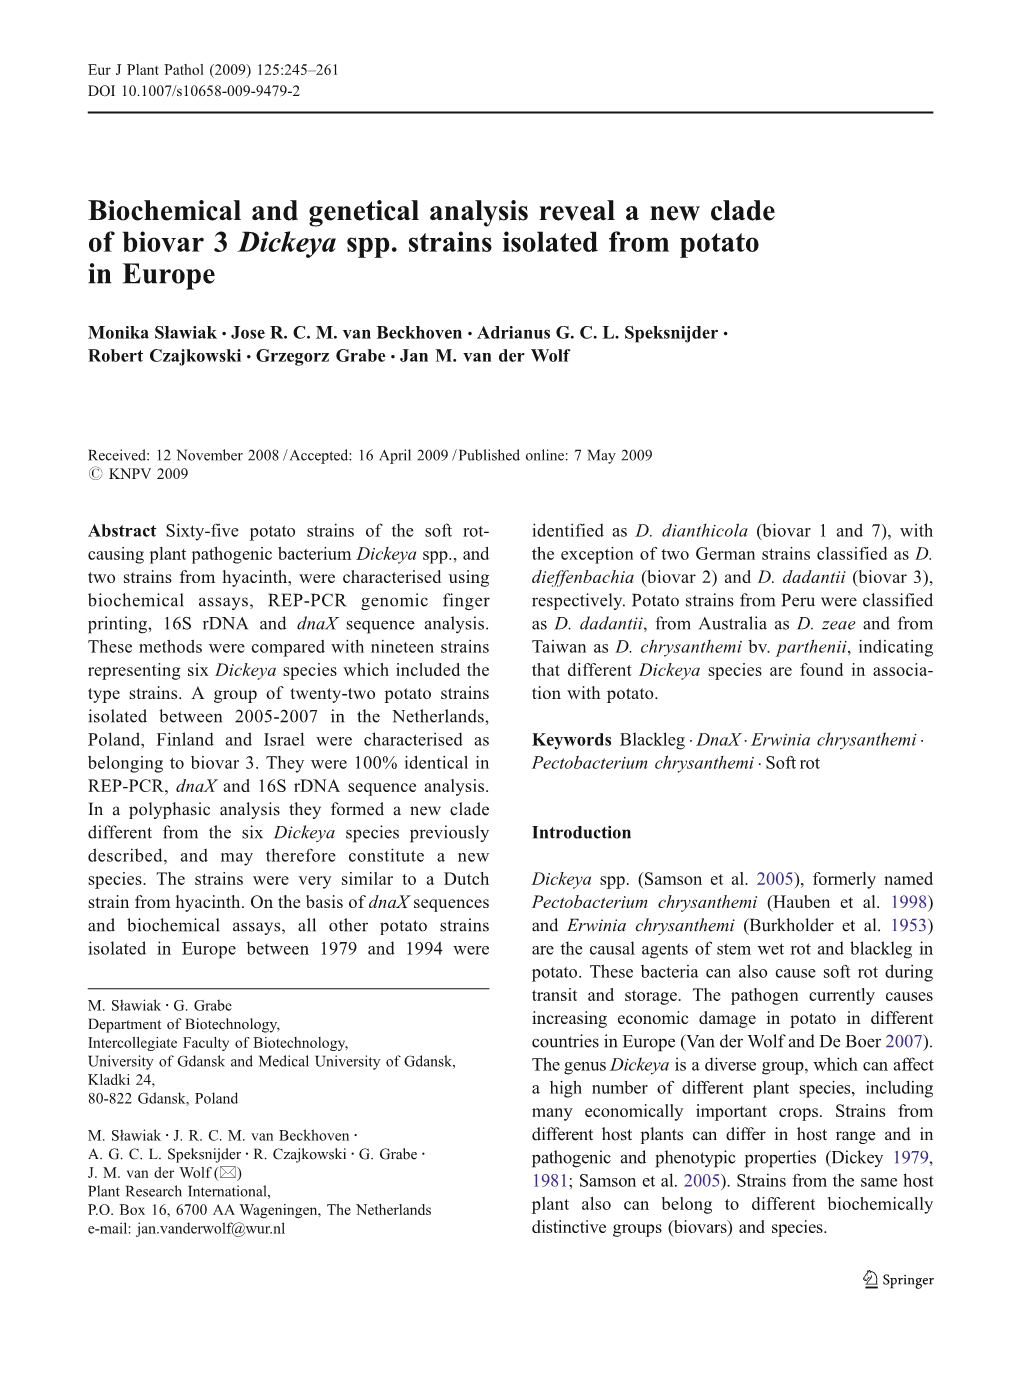 Biochemical and Genetical Analysis Reveal a New Clade of Biovar 3 Dickeya Spp